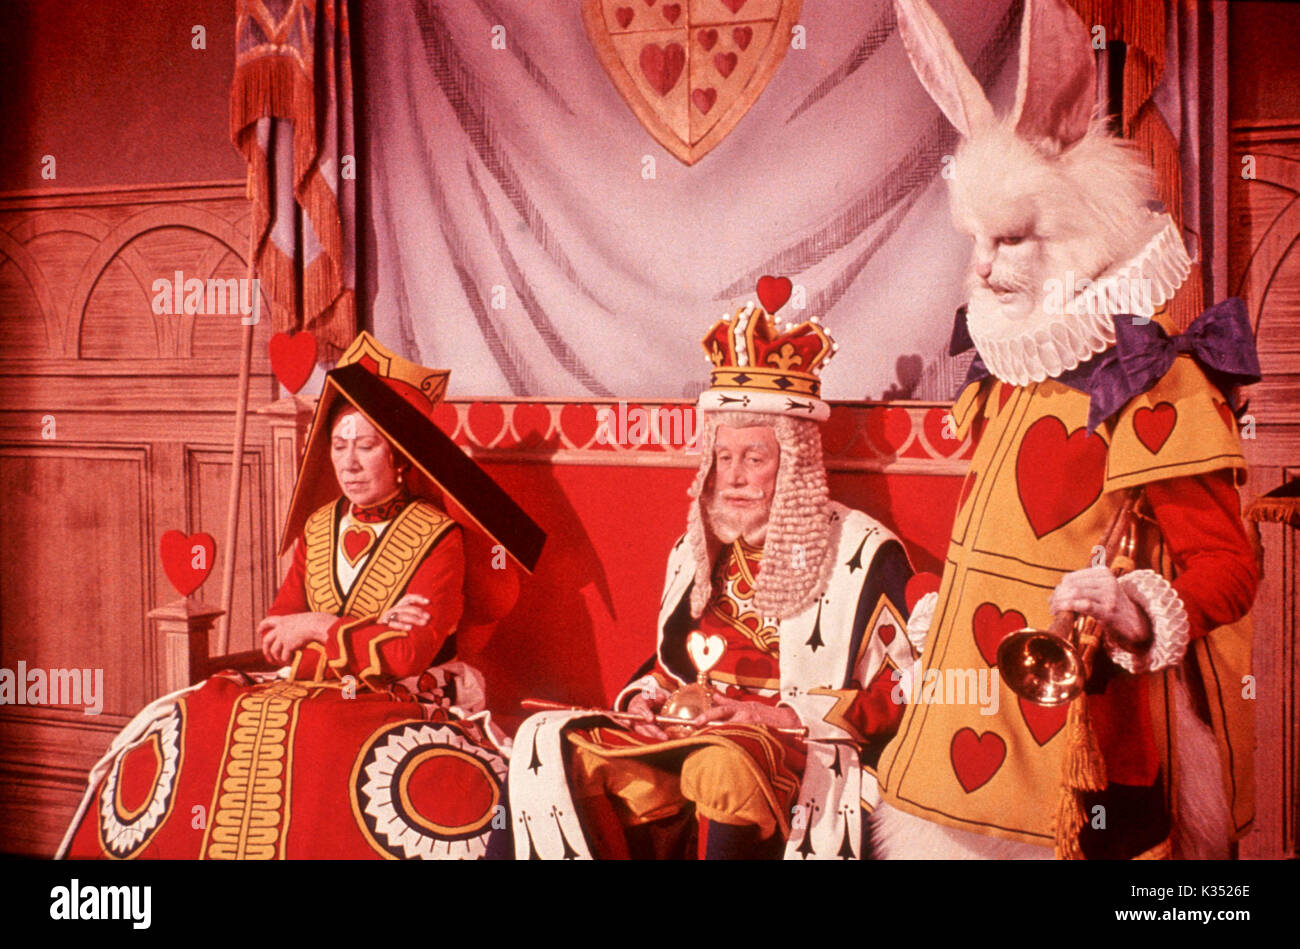 ALICE'S ADVENTURES IN WONDERLAND (UK 1972) FLORA ROBSON (The Queen of Hearts), DENNIS PRICE (The King of Hearts), MICHAEL CRAWFORD (The White Rabbit)   ALICE'S ADVENTURES IN WONDERLAND [BR 1972]     Date: 1972 Stock Photo